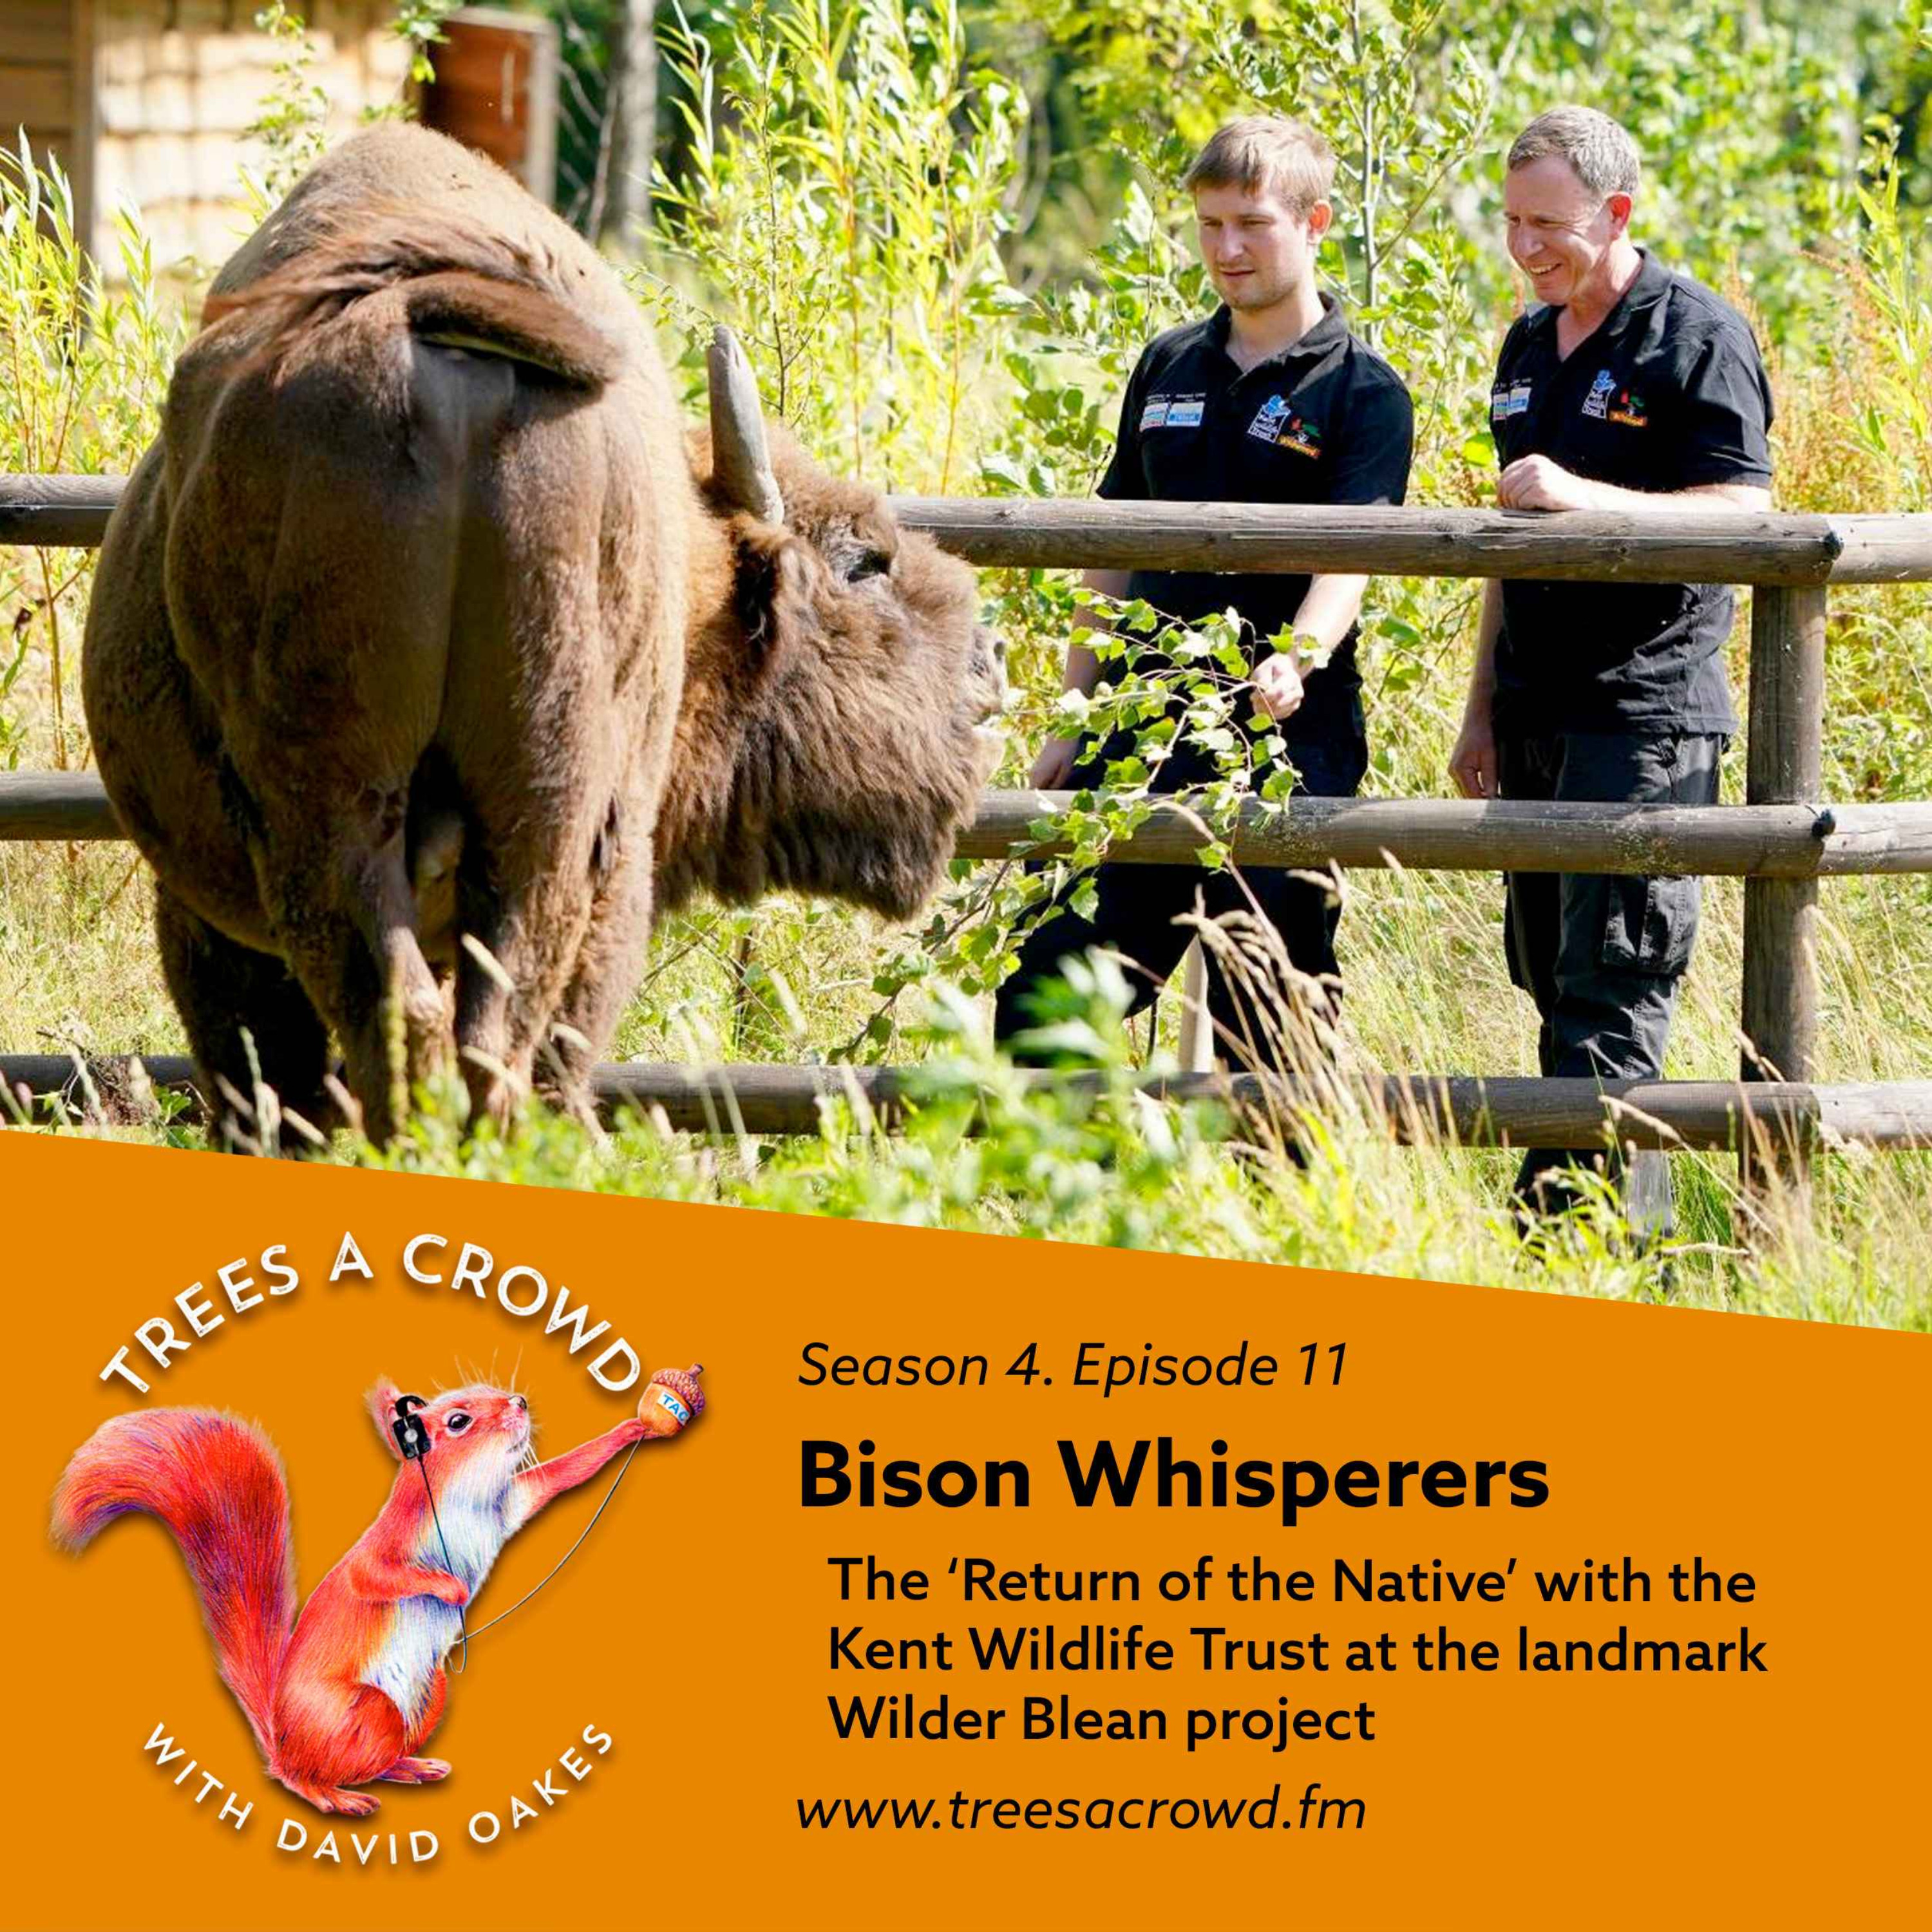 Bison Whisperers: The Return of the Native